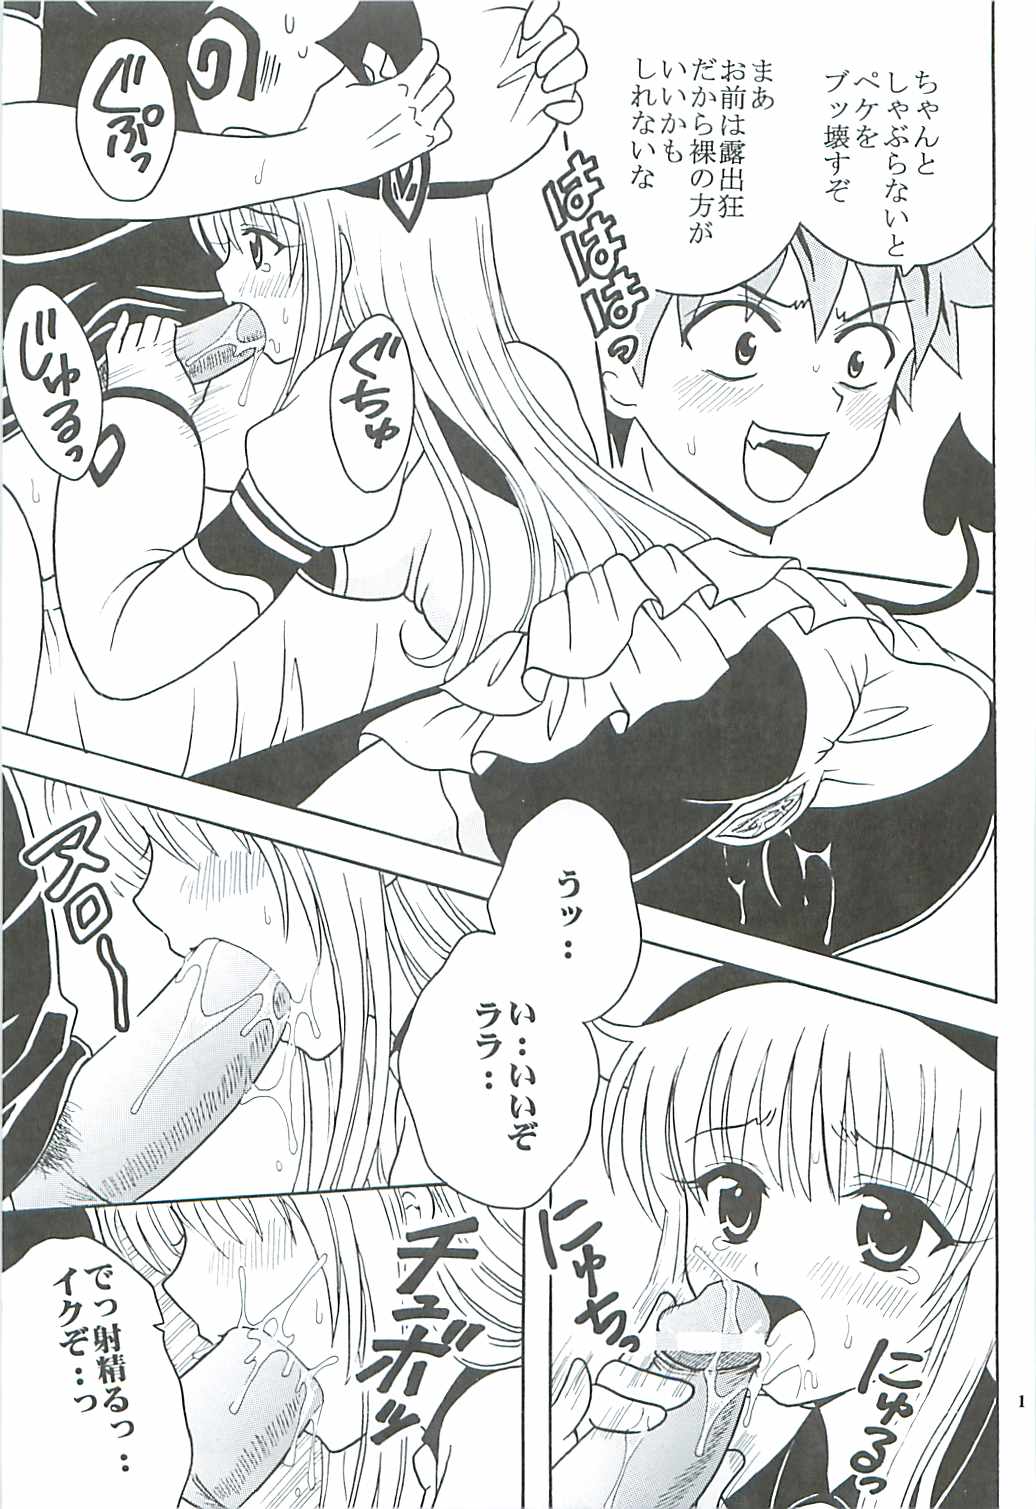 [St.Rio] ToLOVE Ryu 2 (To Love Ru) page 18 full